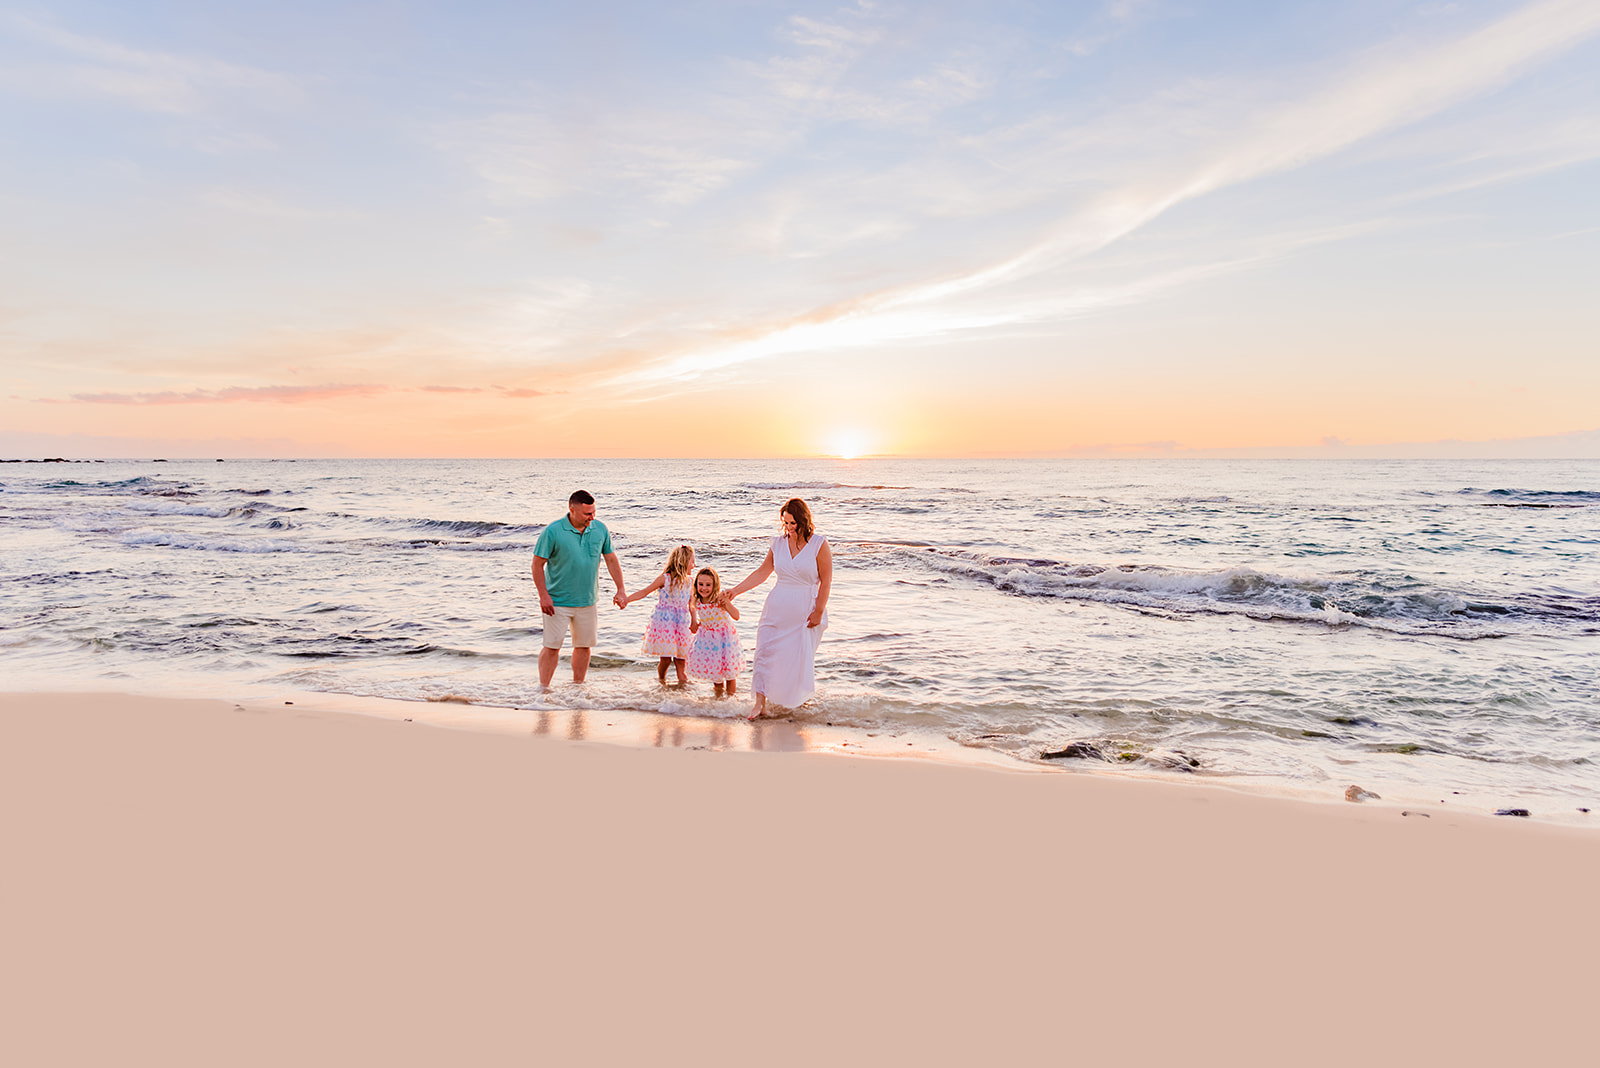 A mother, father, and two young daughters walk together in the waves during a beach family photo session on Maui, one of the best family photo locations in Hawaii.